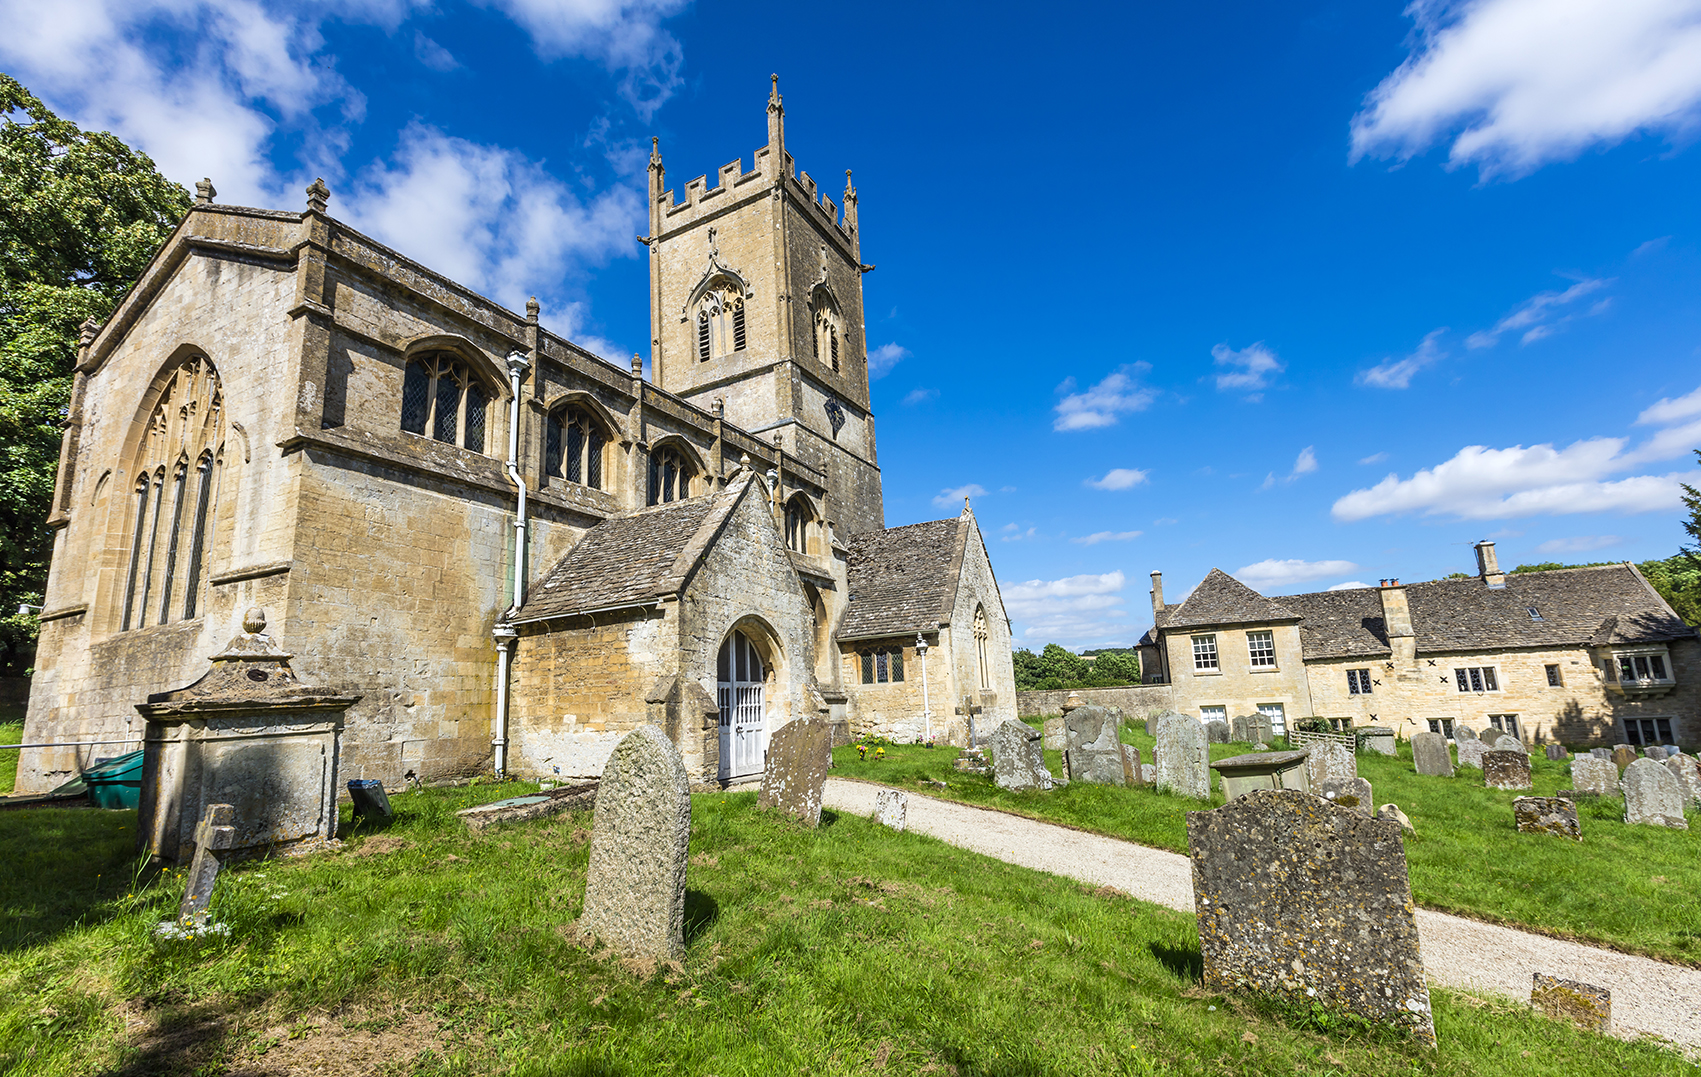 Typical rural English village church and cemetery in the Cotswolds